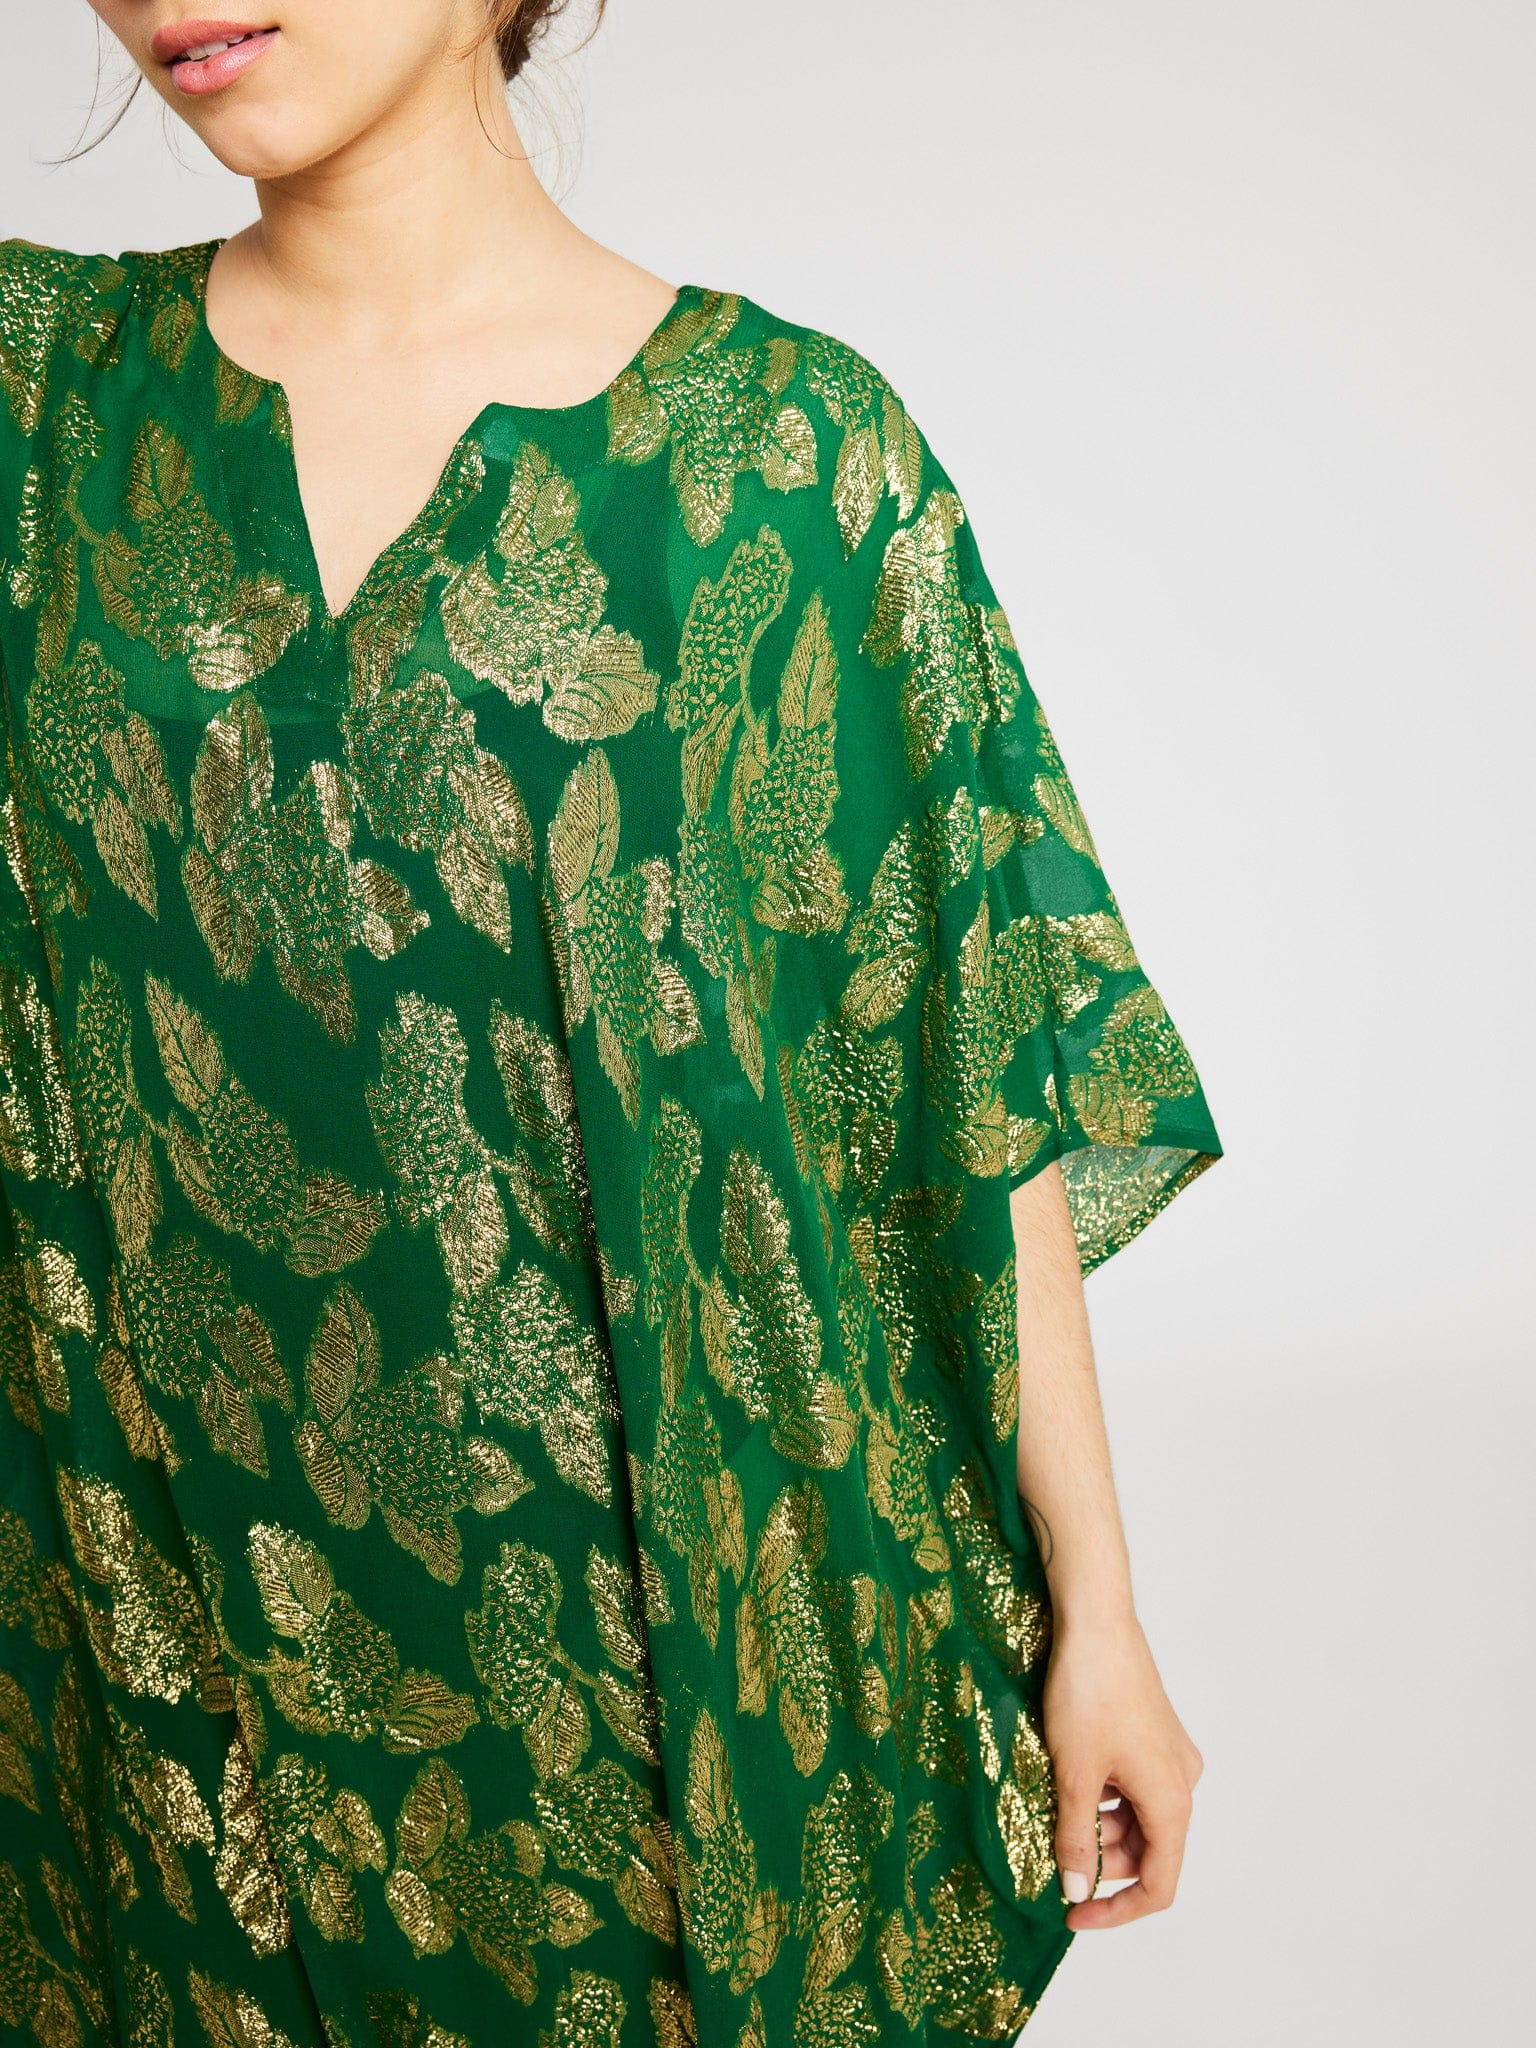 MILLE Clothing Beverly Caftan in Malachite Shimmer